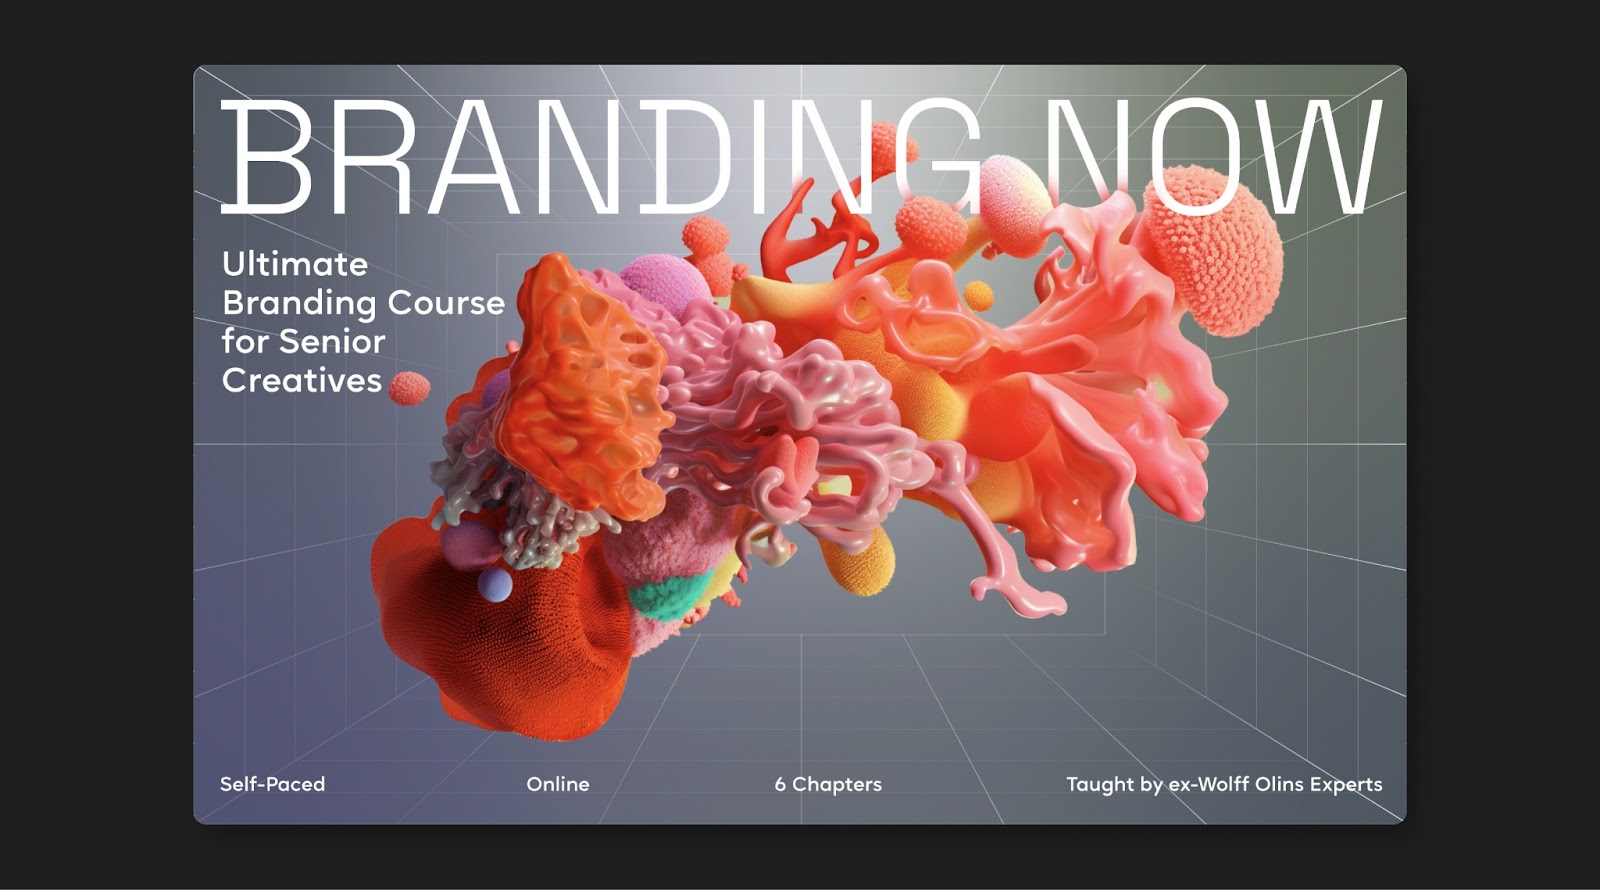 Artifact from the Evolving Course Identity: Branding Now's Bold Redesign article on Abduzeedo